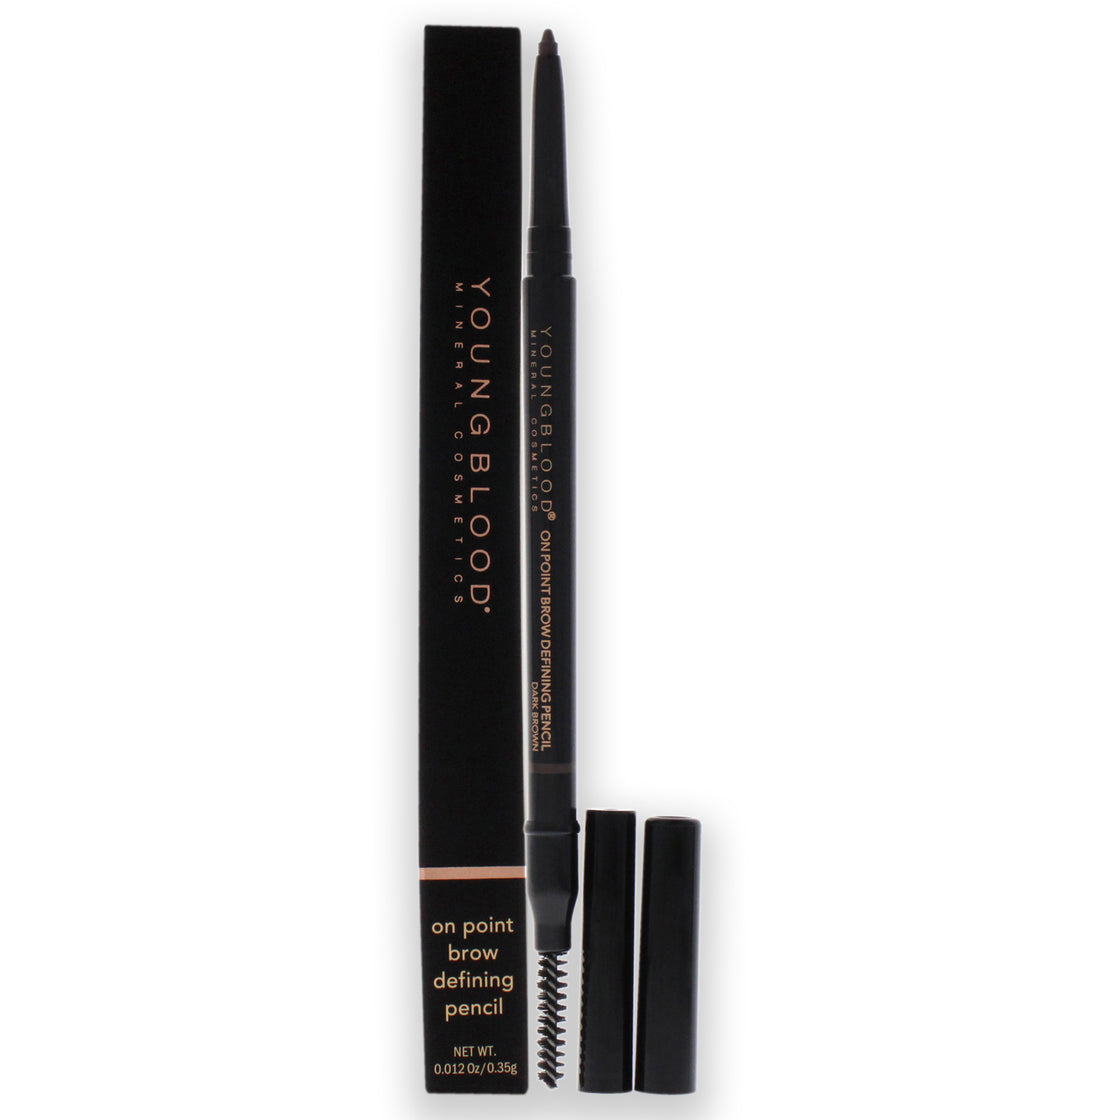 On Point Brow Defining Pencil - Dark Brown by Youngblood for Women - 0.012 oz Eyebrow Pencil